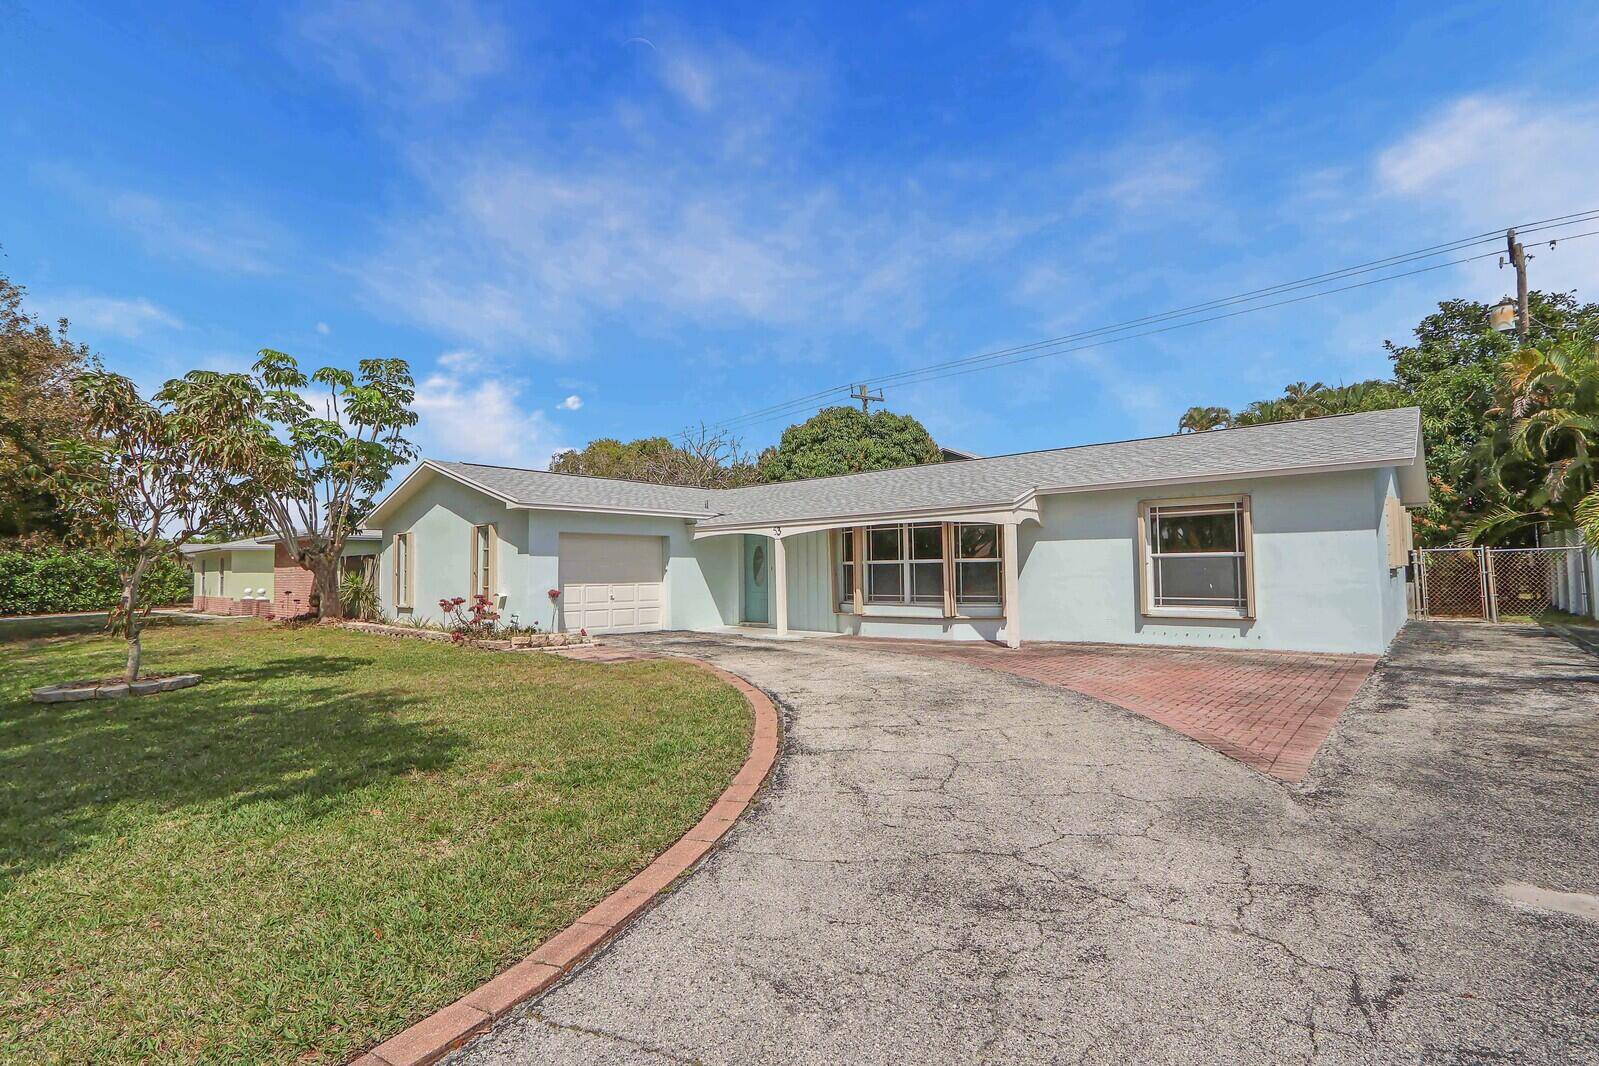 53 Willow Road is a CBS home located in the Village of Tequesta No HOA only a short golf cart ride from some of the finest beaches, restaurants, tiki bars ...